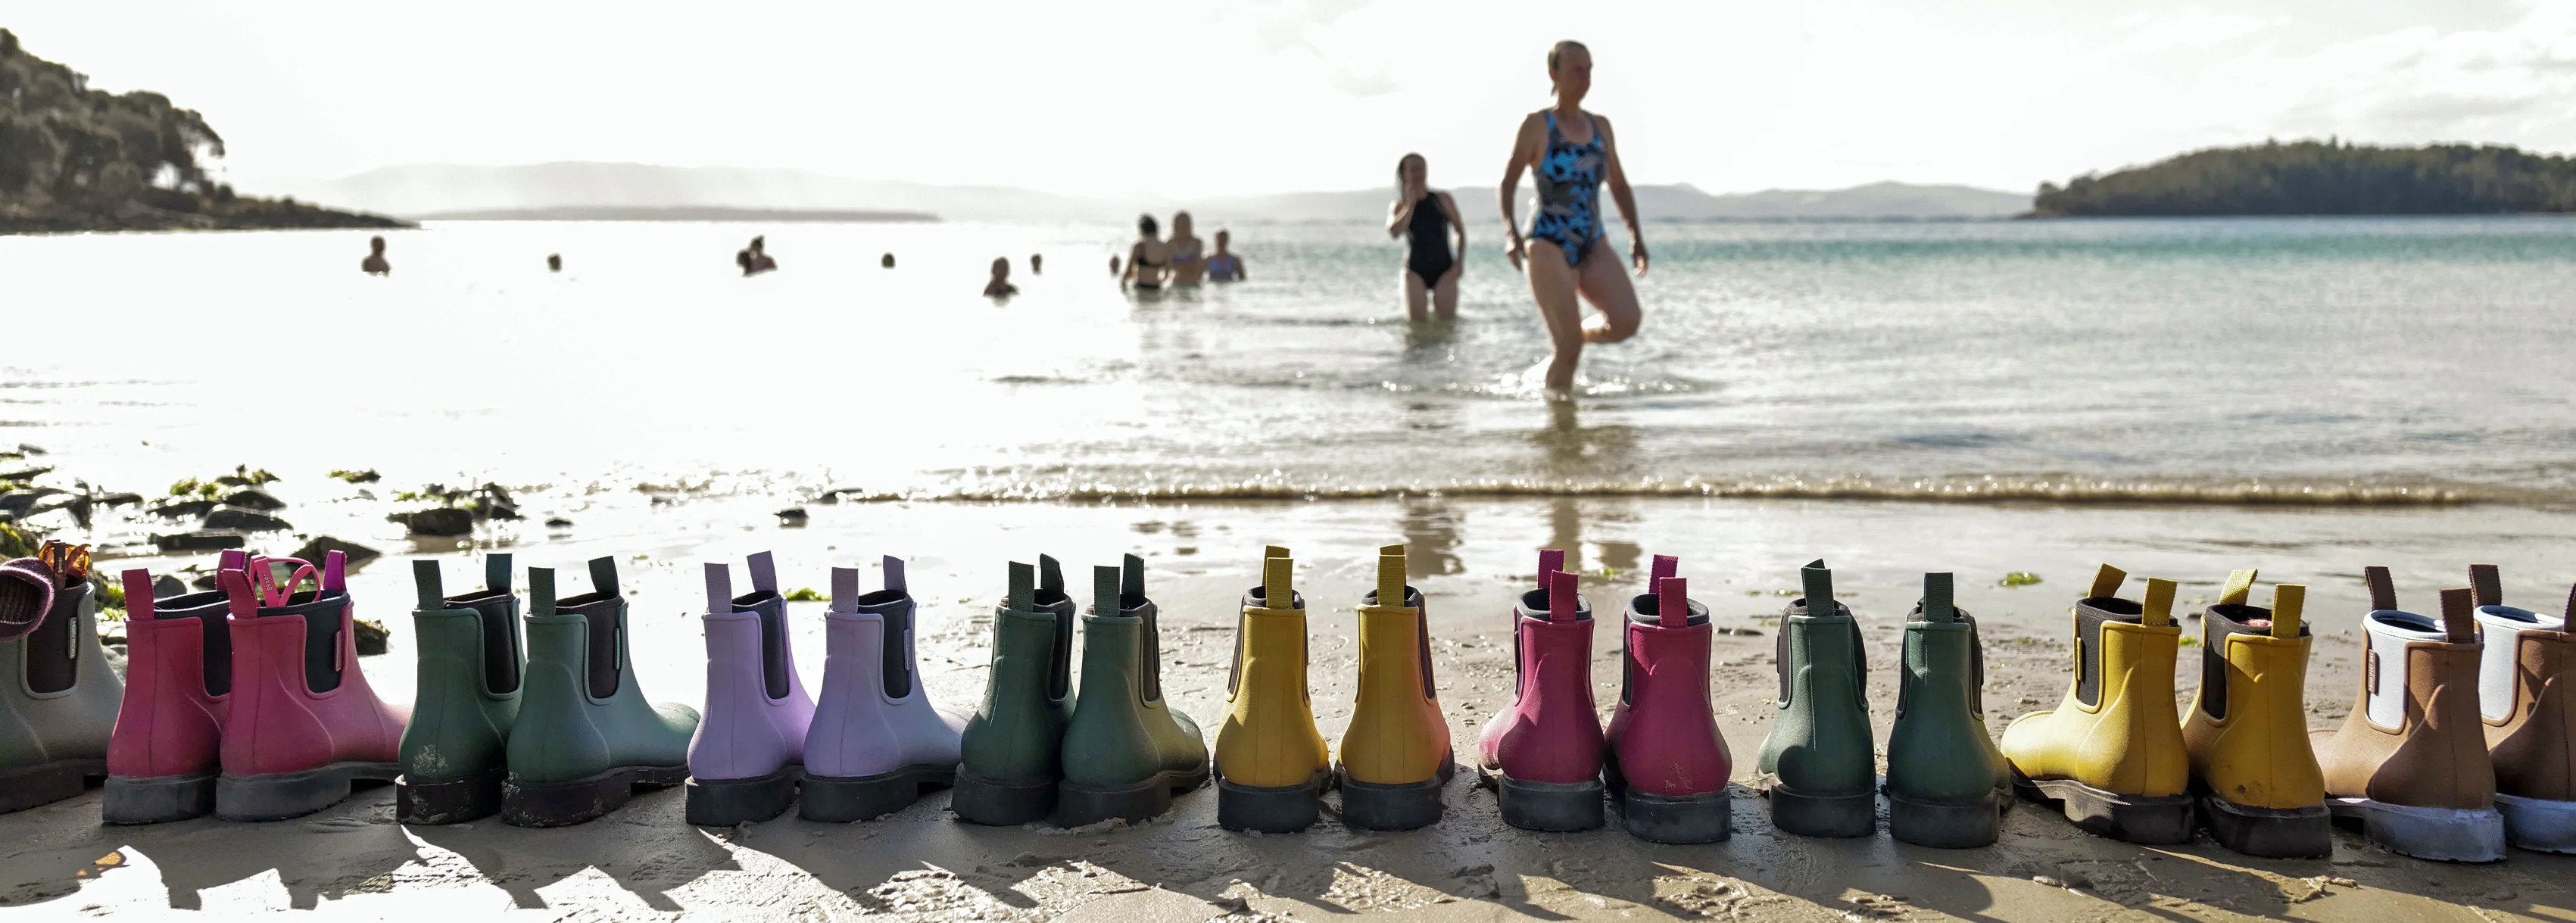 A line of Merry People boots are set against the shore line of a beach